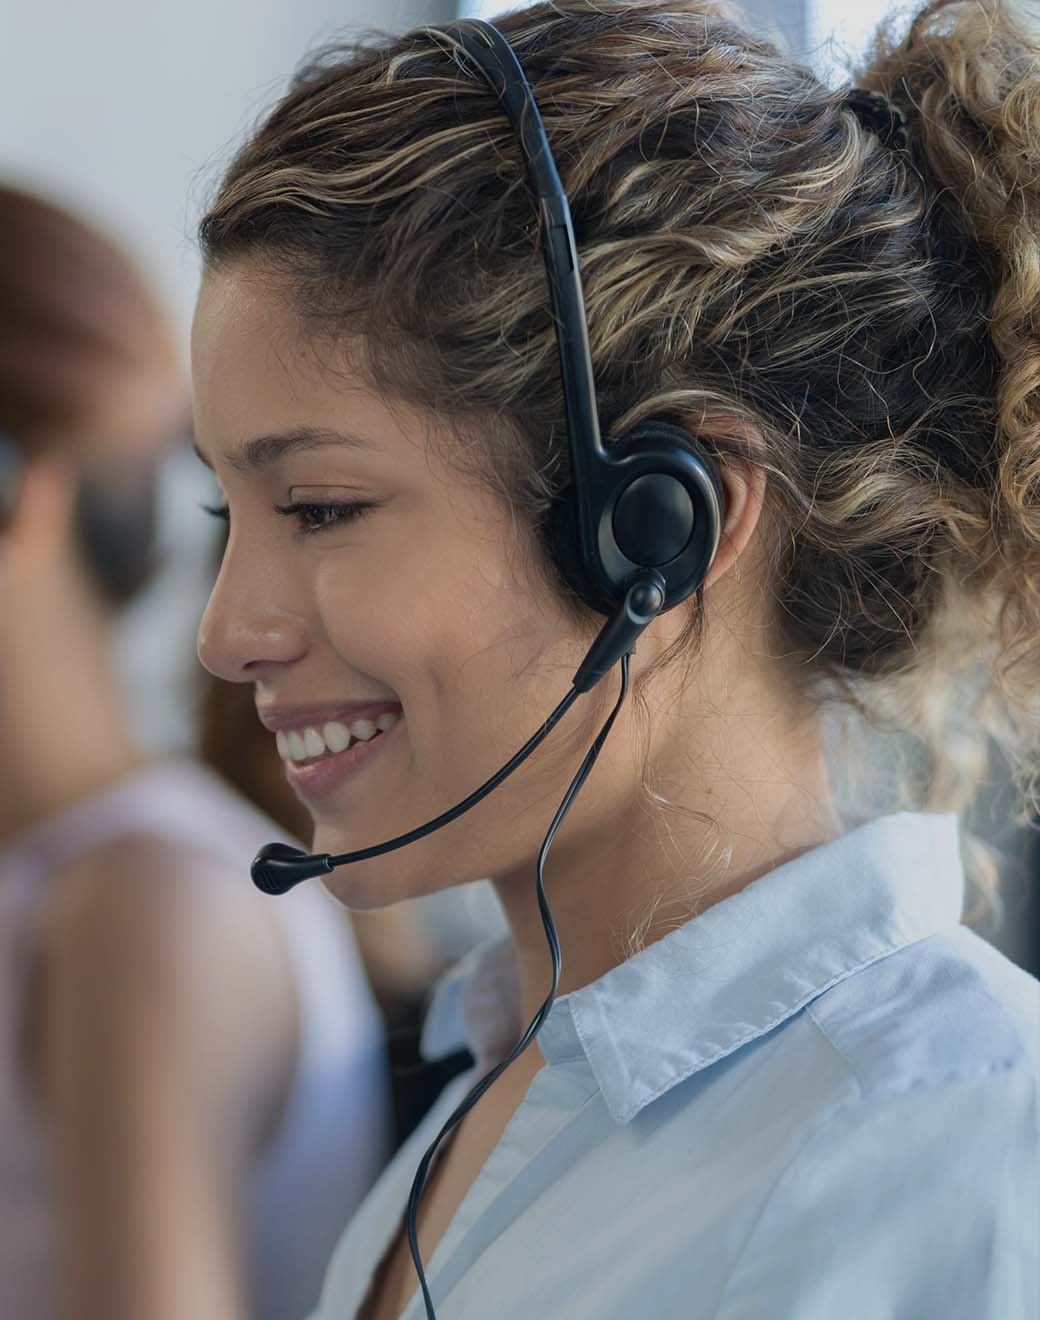 Young woman wearing a call headset and smiling.